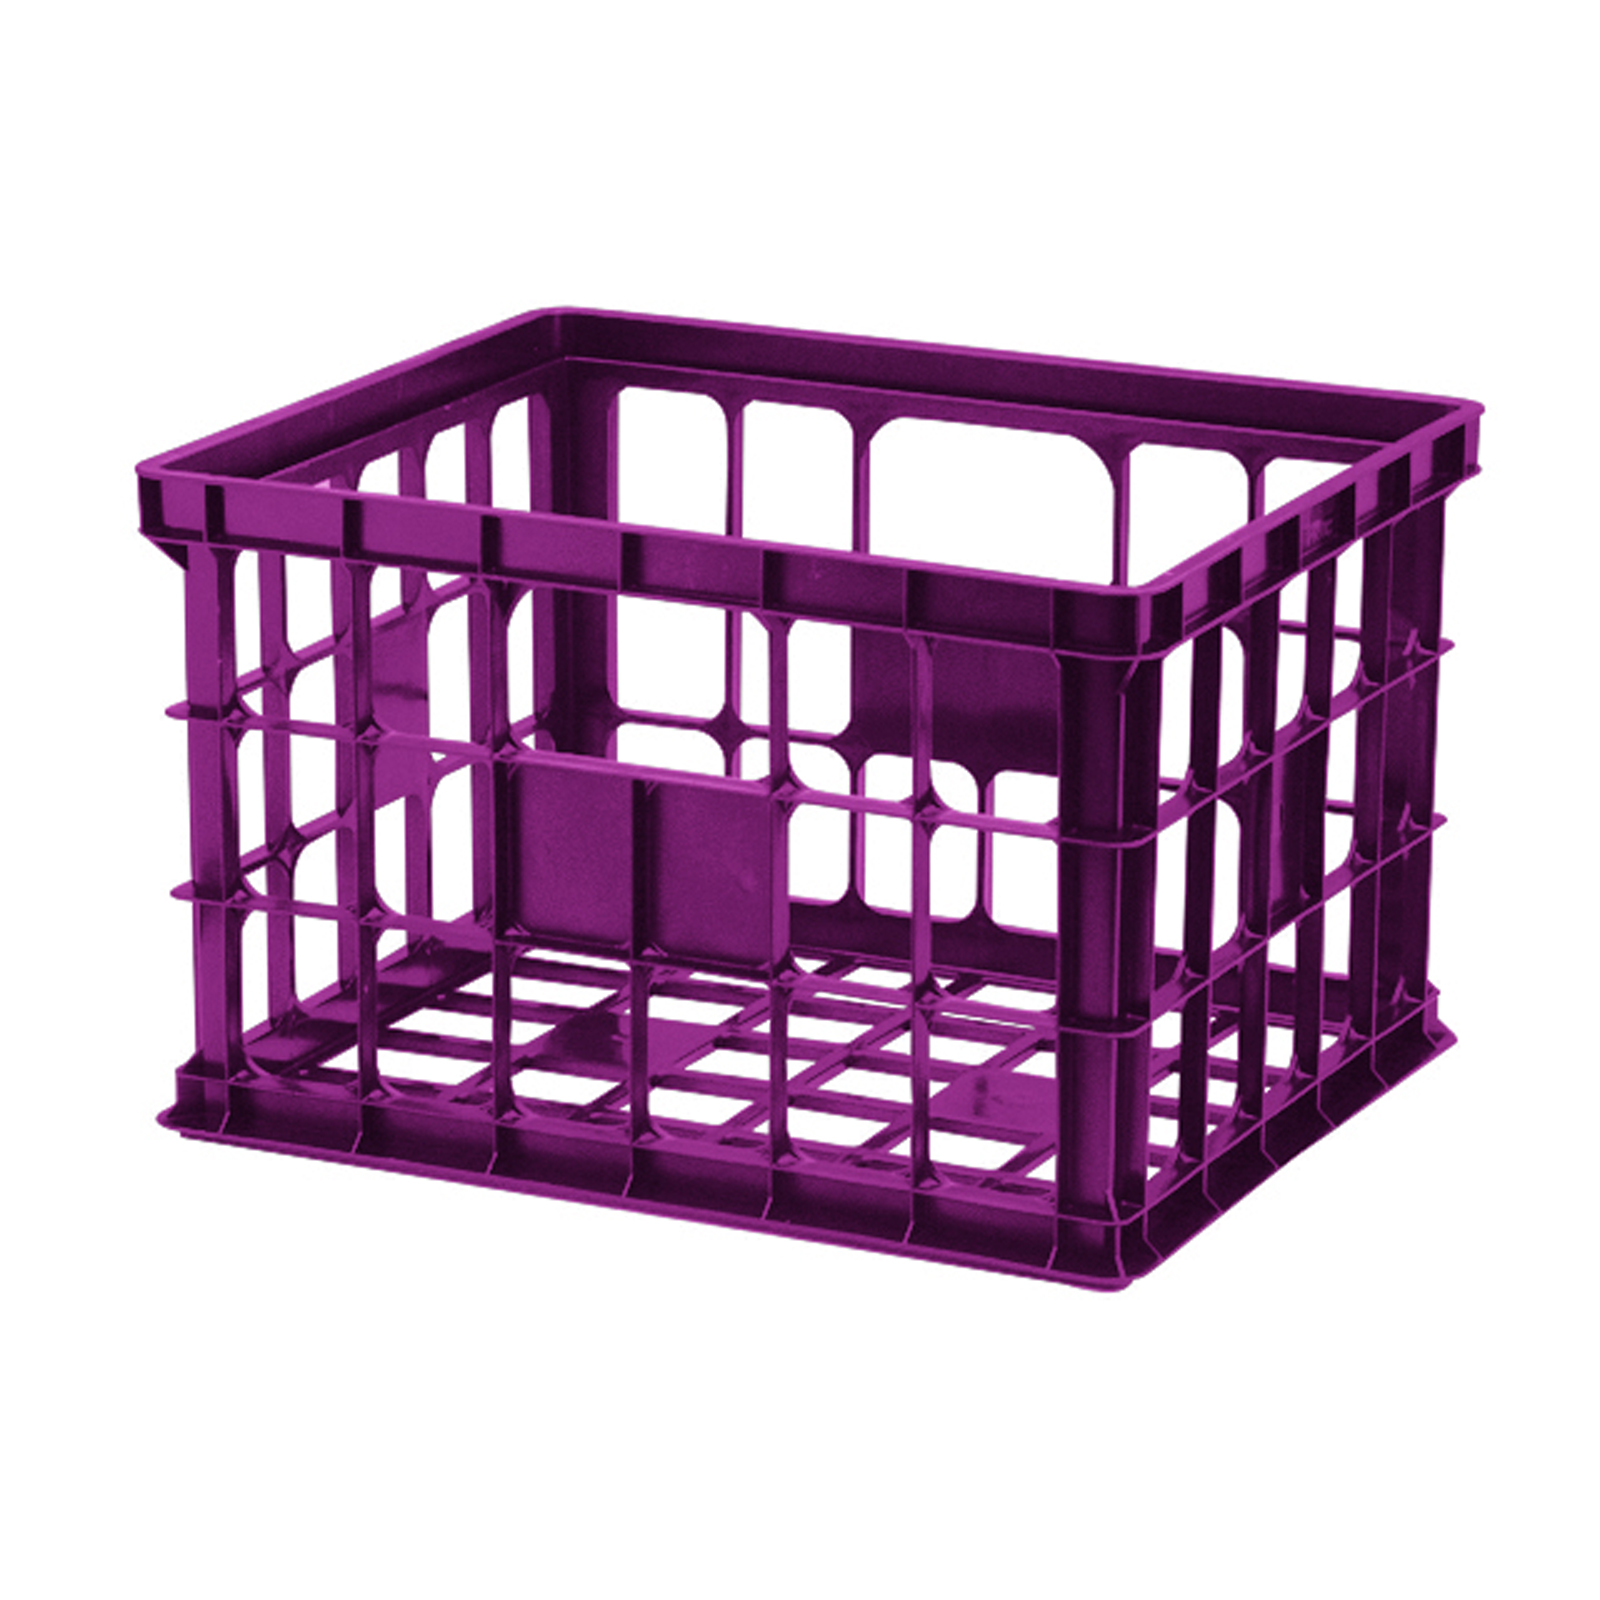 United Solutions File Crate - Purple